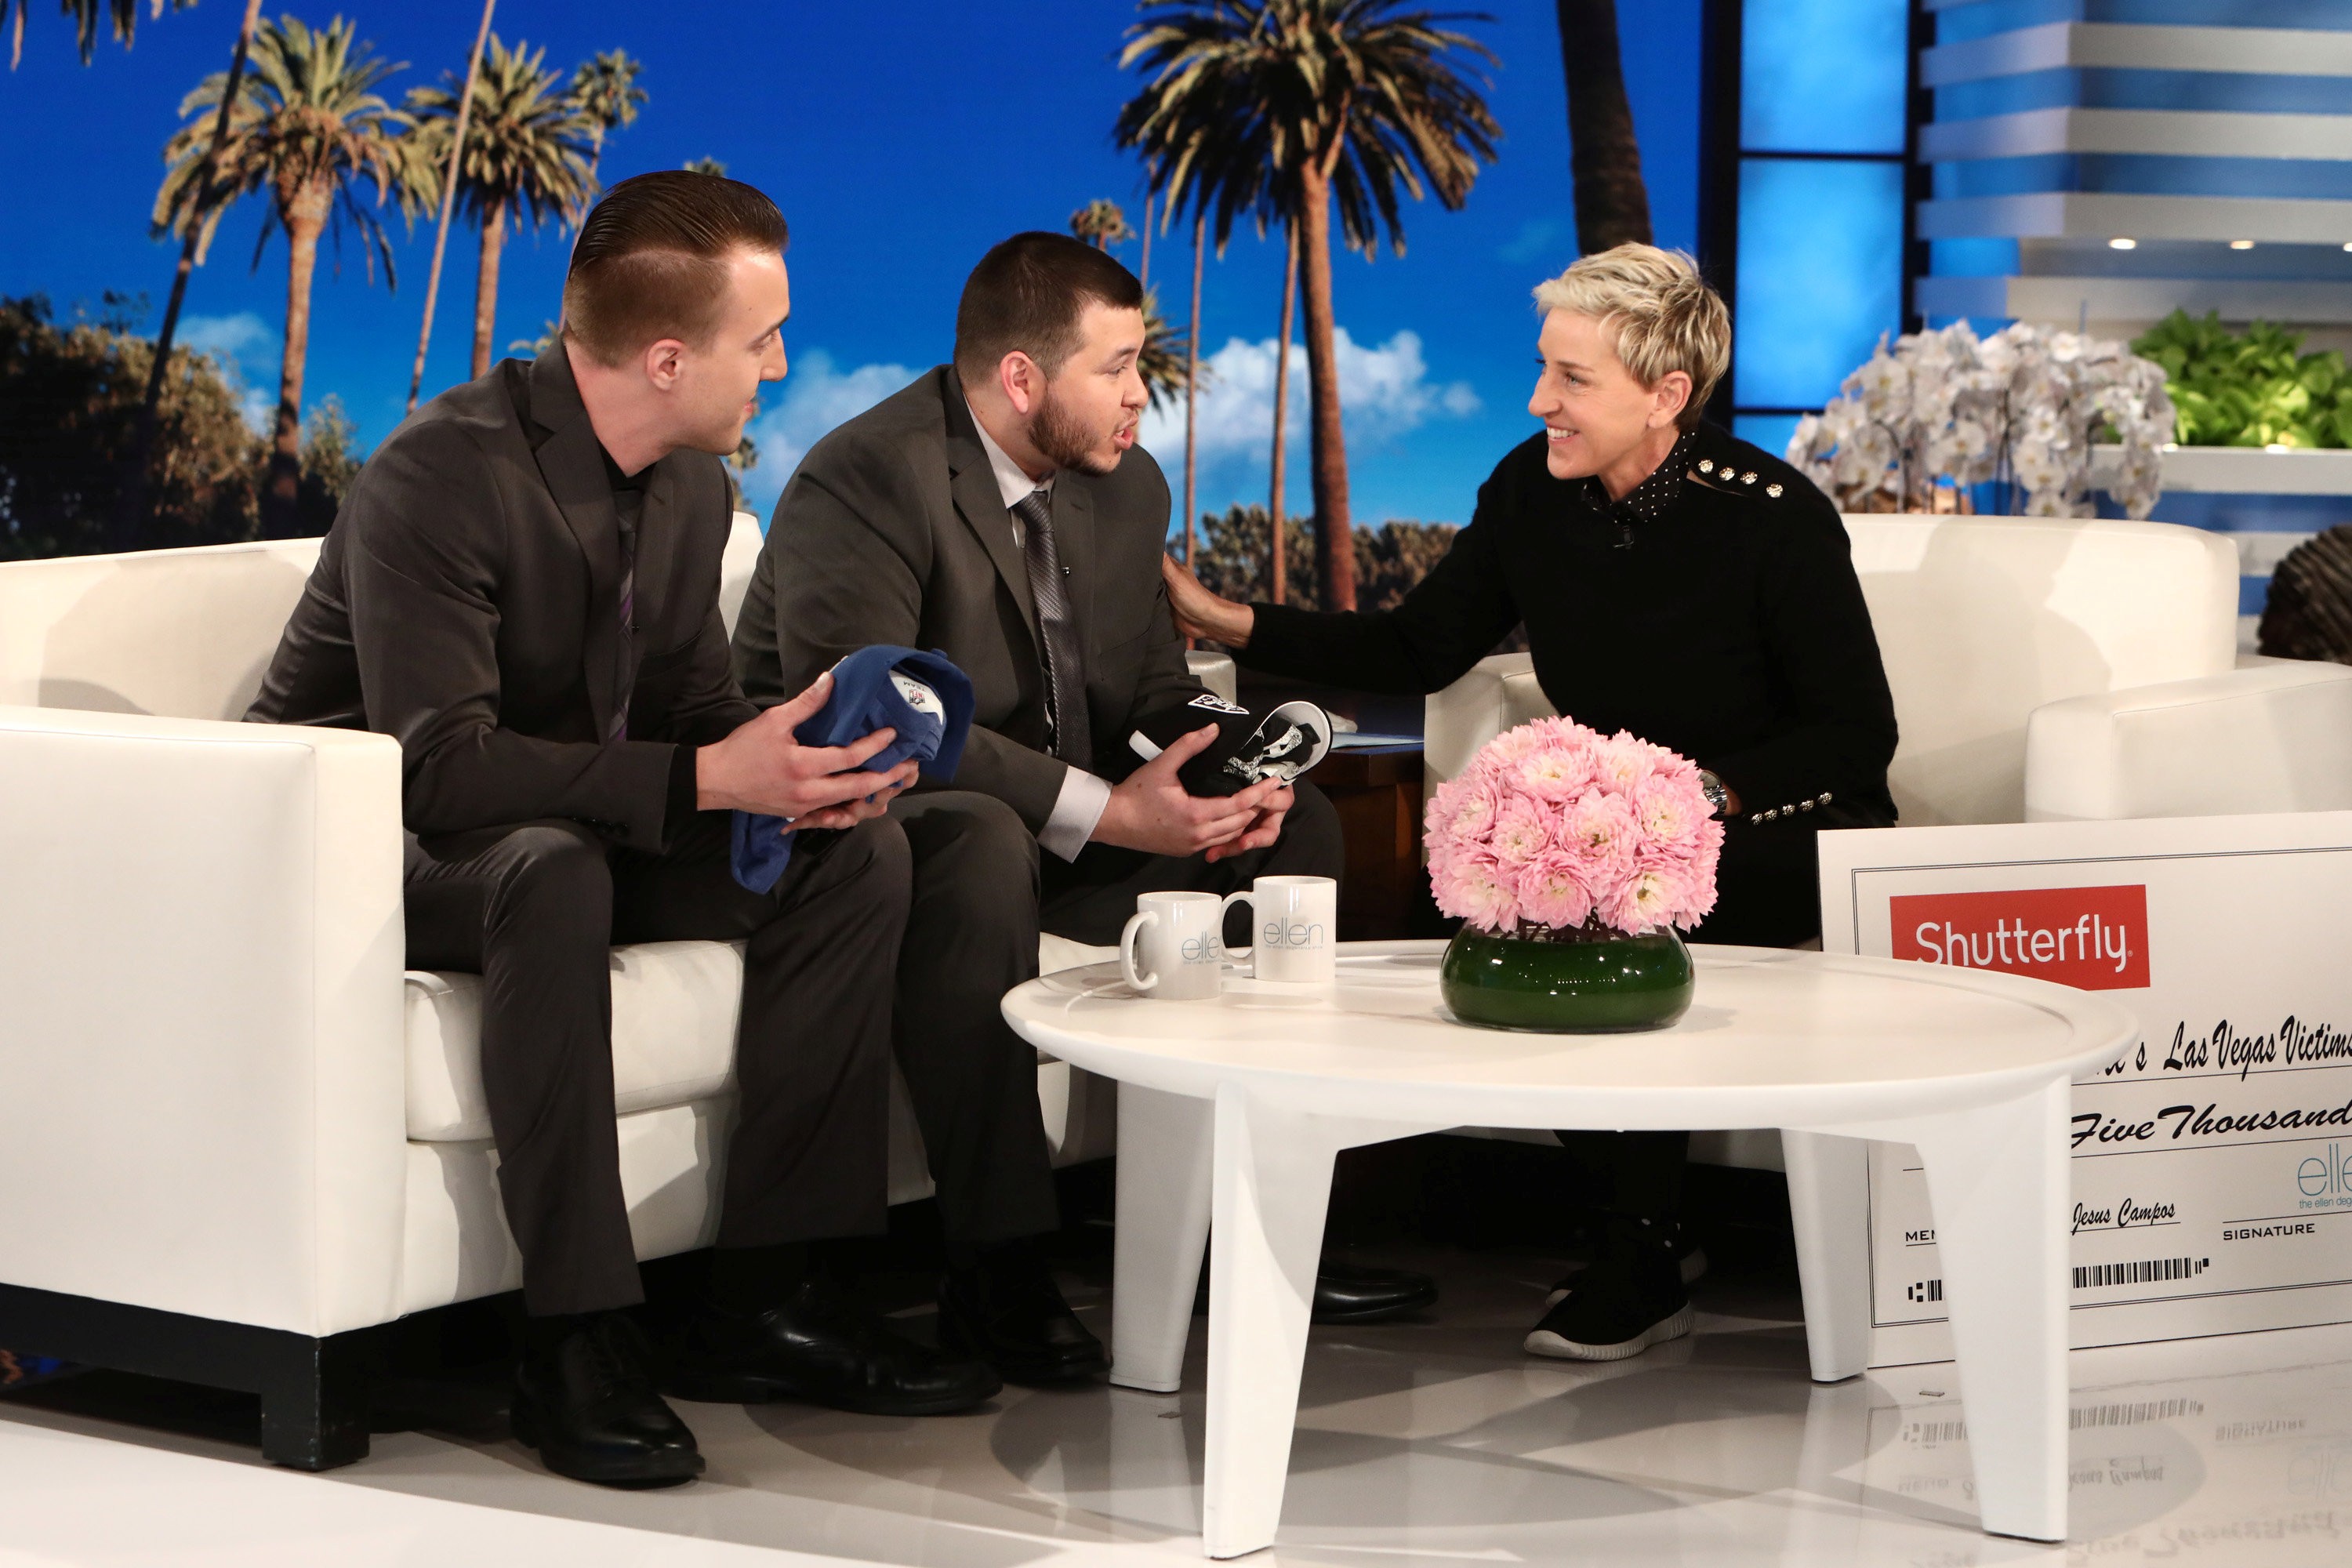 Stephen Schuck (left) and security guard Jesus Campos of the Mandalay Bay Resort and Casino in Las Vegas, are interviewed by host Ellen DeGeneres in this photo released Wednesday. Photo: Reuters